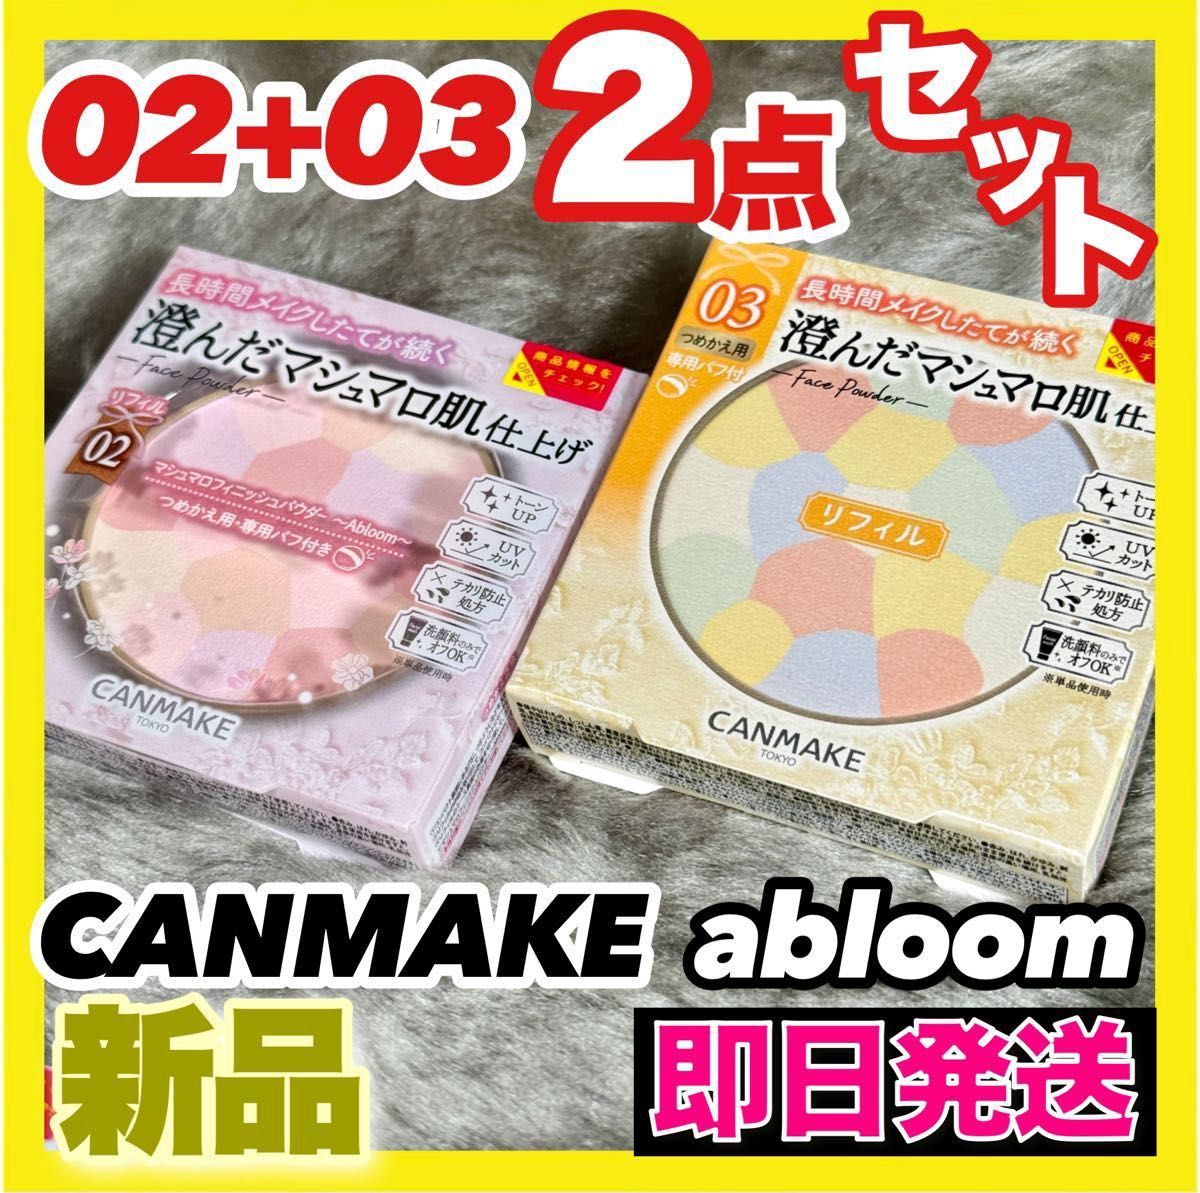 CANMAKE マシュマロフィニッシュパウダー abloom 01  or 02 サクラチュール  or 03 ×2点セット 新品